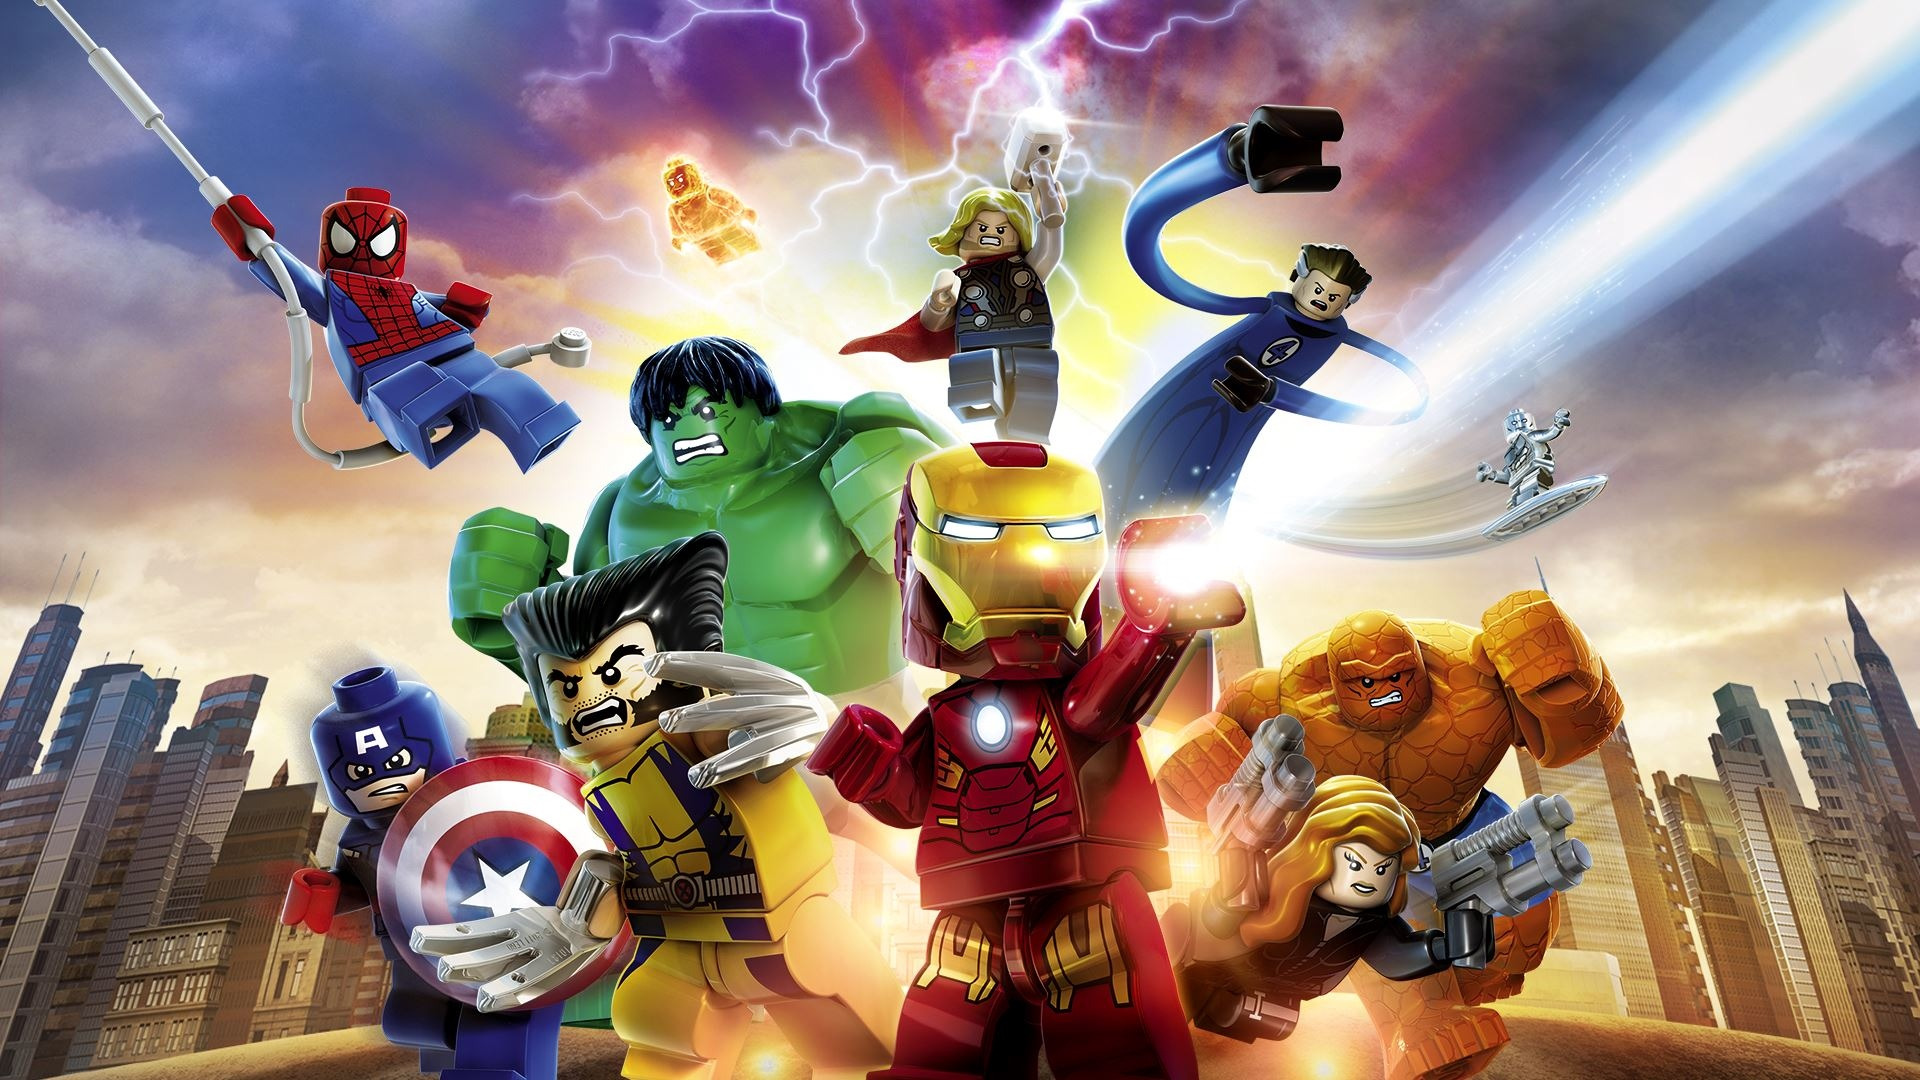 Show LEGO Marvel Super Heroes — Guardians of the Galaxy: The Thanos Threat